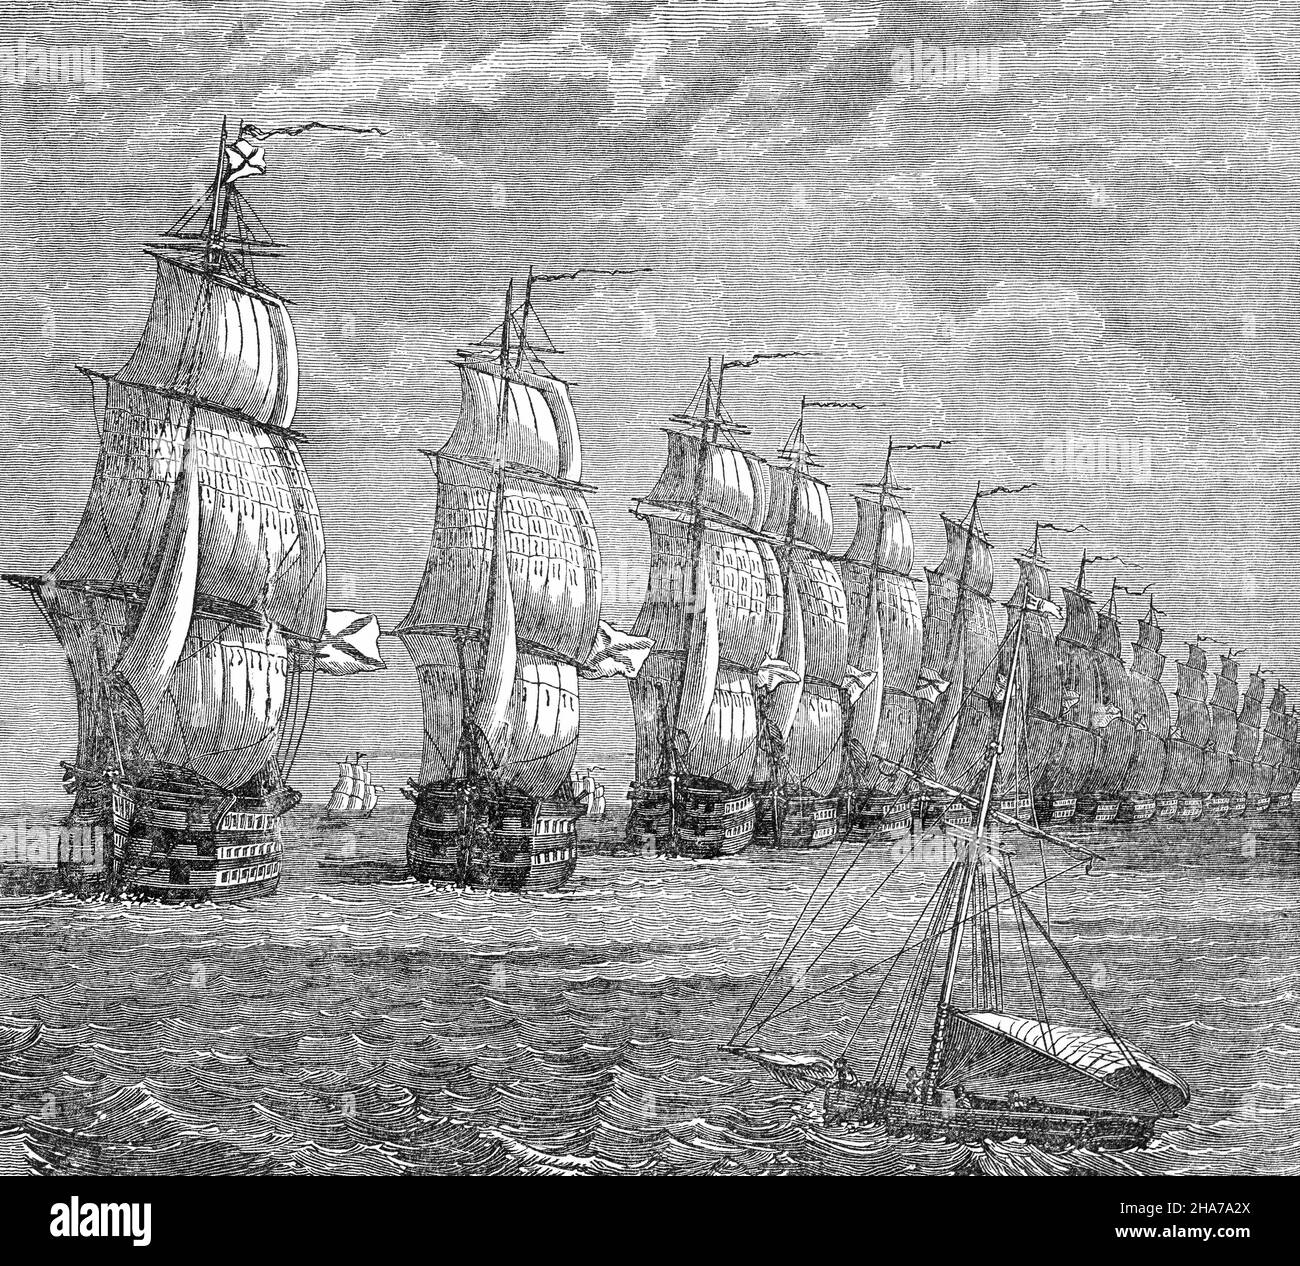 A late 19th Century illustration of the Russian fleet under full sail. The modern Russian Navy was created at the initiative of Peter the Great and expanded iunder Catherine the Great resulting in the establishment of the Black Sea Fleet, with its bases in Sevastopol (1783) and Kherson. It was at that time that Russian warships started to venture into the Mediterranean on a regular basis. Stock Photo